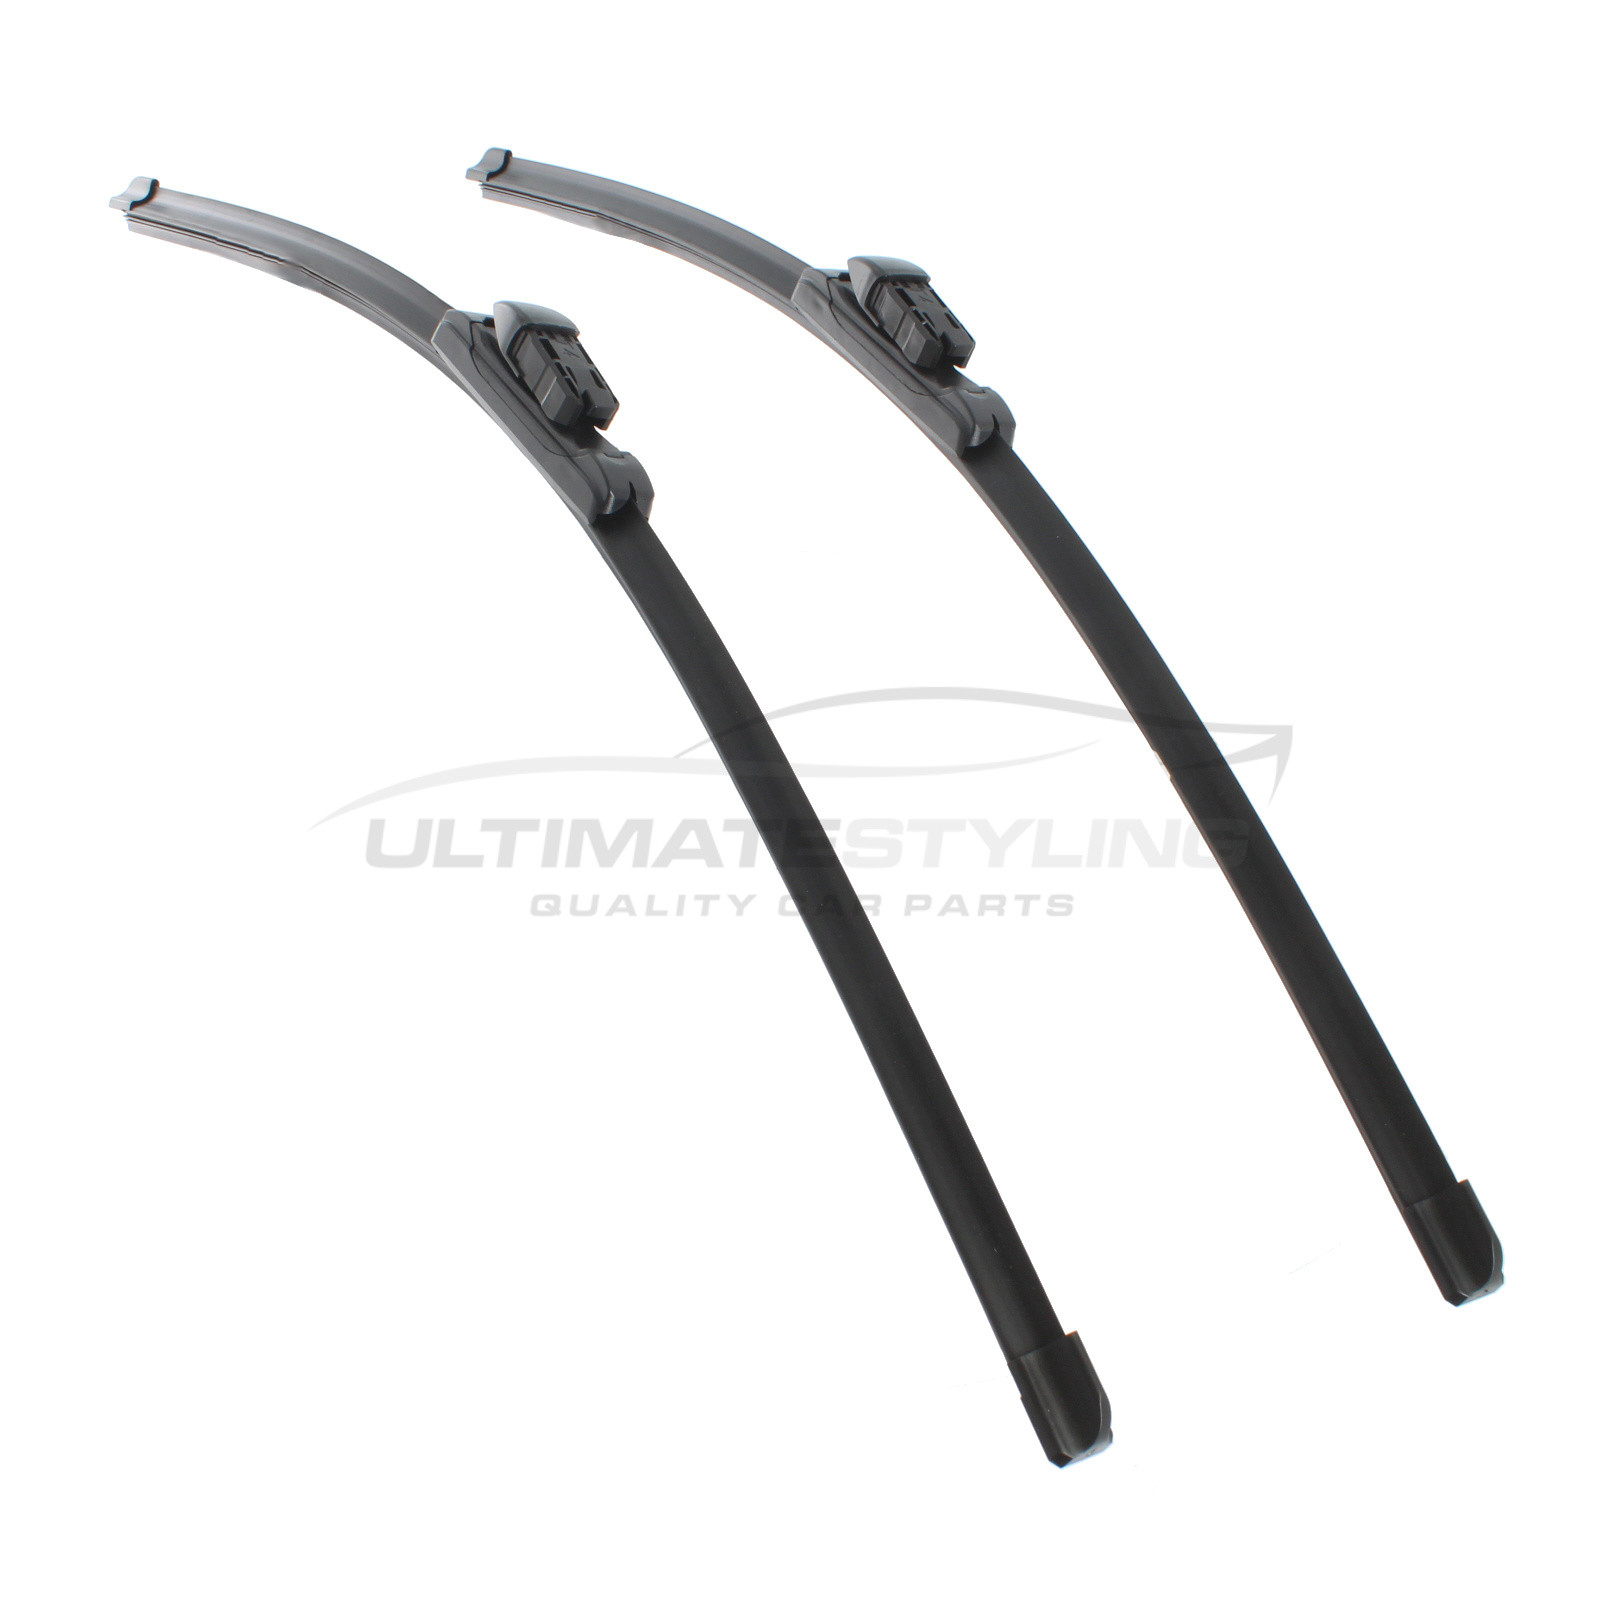 Drivers Side & Passenger Side (Front) Wiper Blades for Vauxhall Ampera